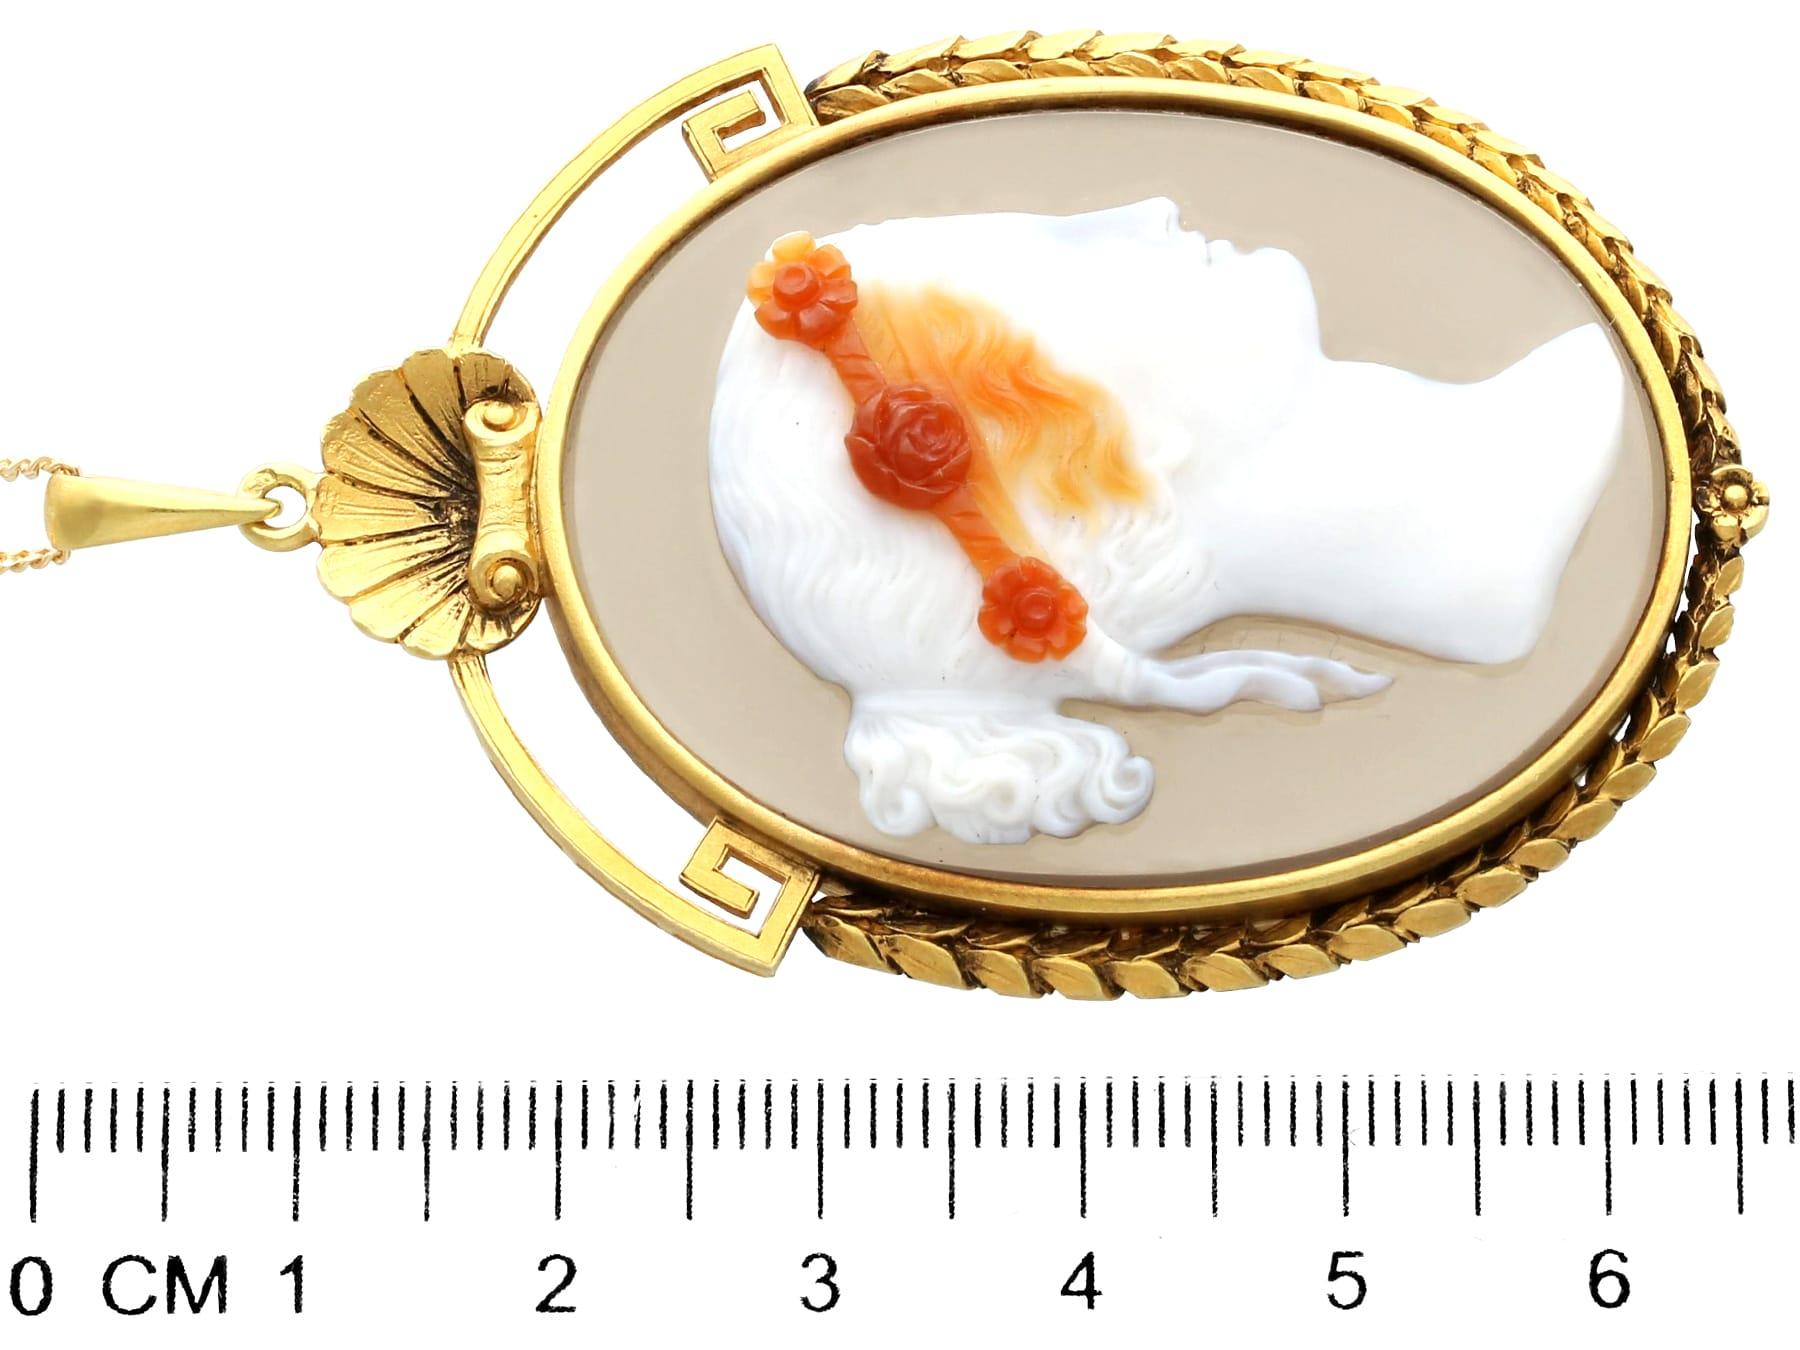 Antique French 18 Karat Yellow Gold Cameo Pendant In Excellent Condition For Sale In Jesmond, Newcastle Upon Tyne